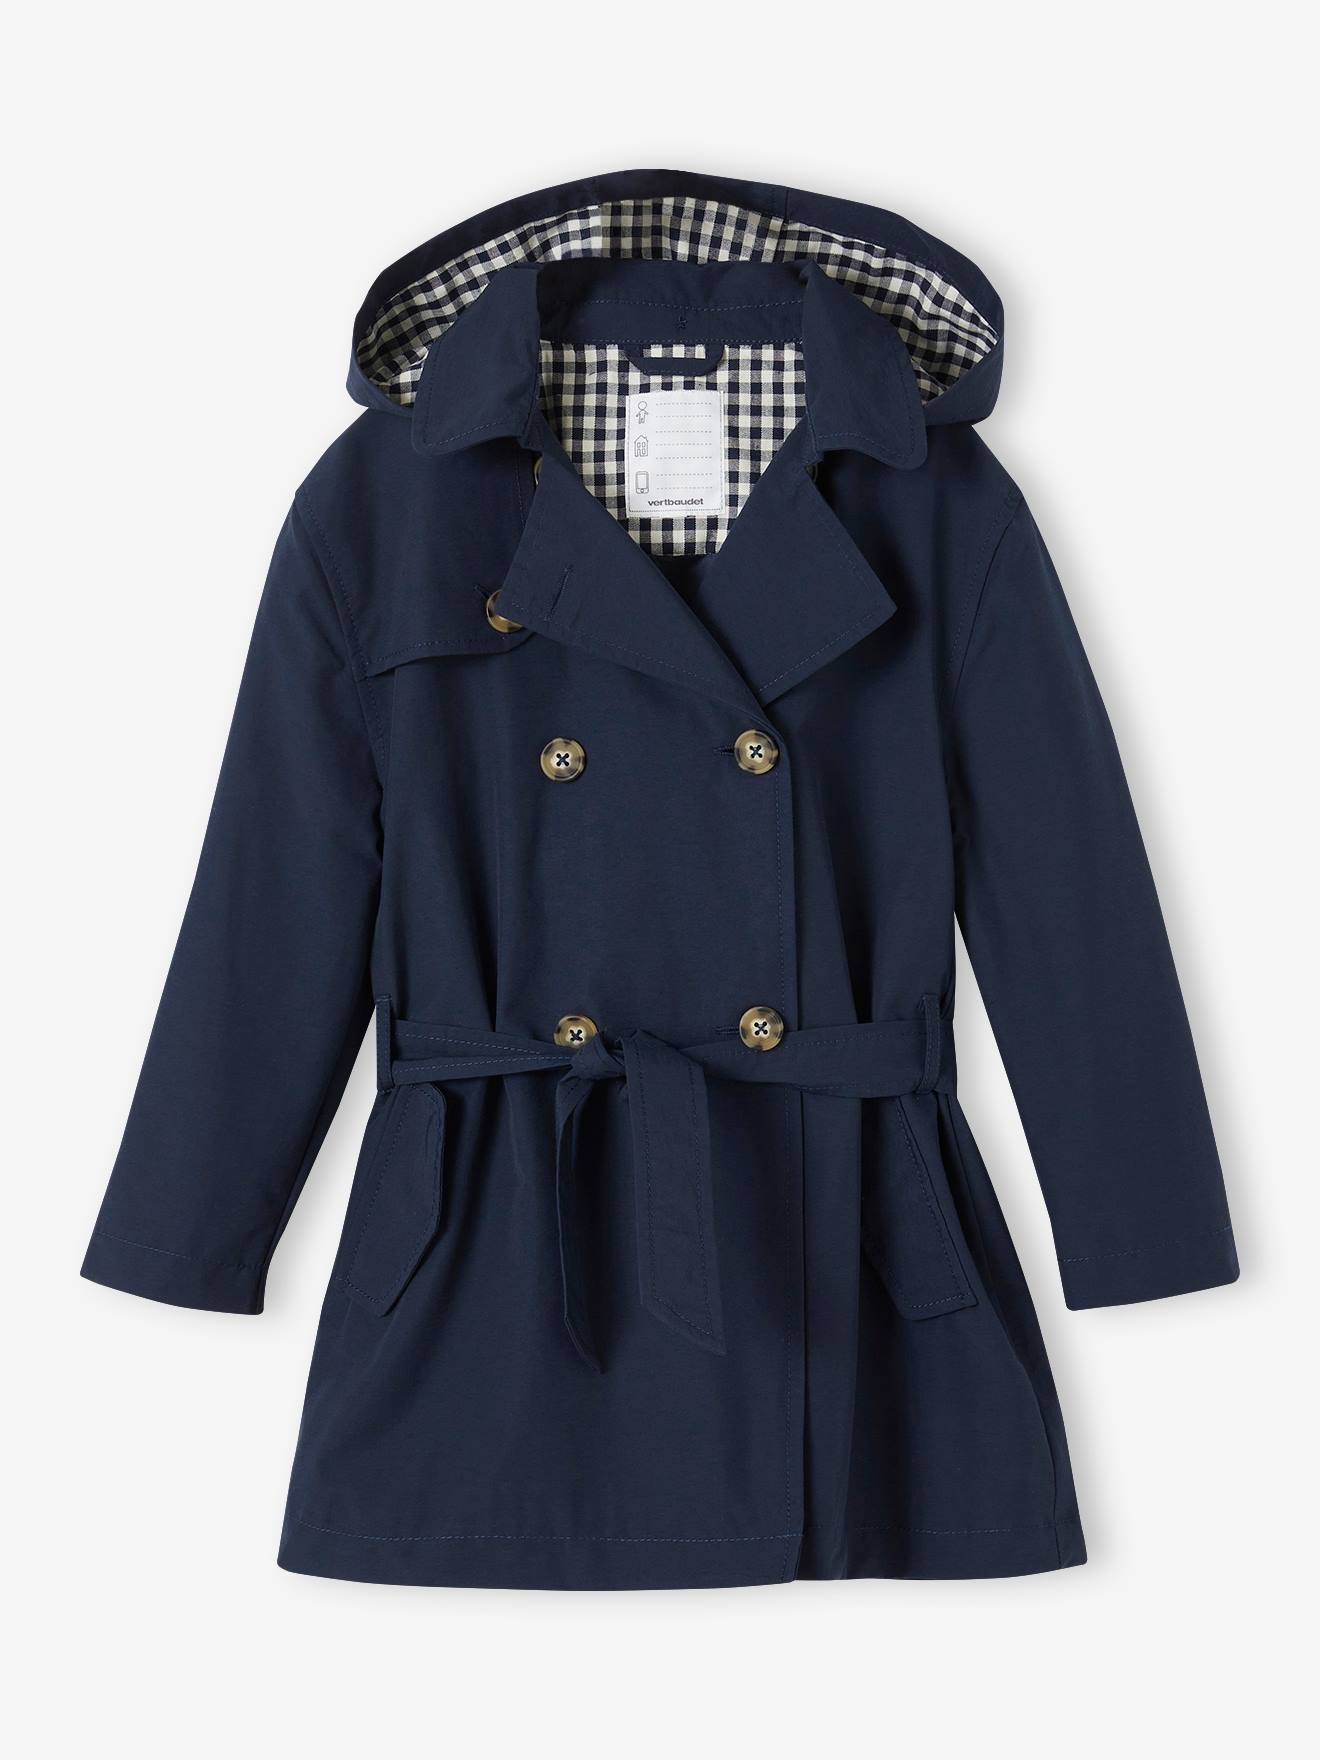 Trench Coat with Removable Hood for Girls navy blue